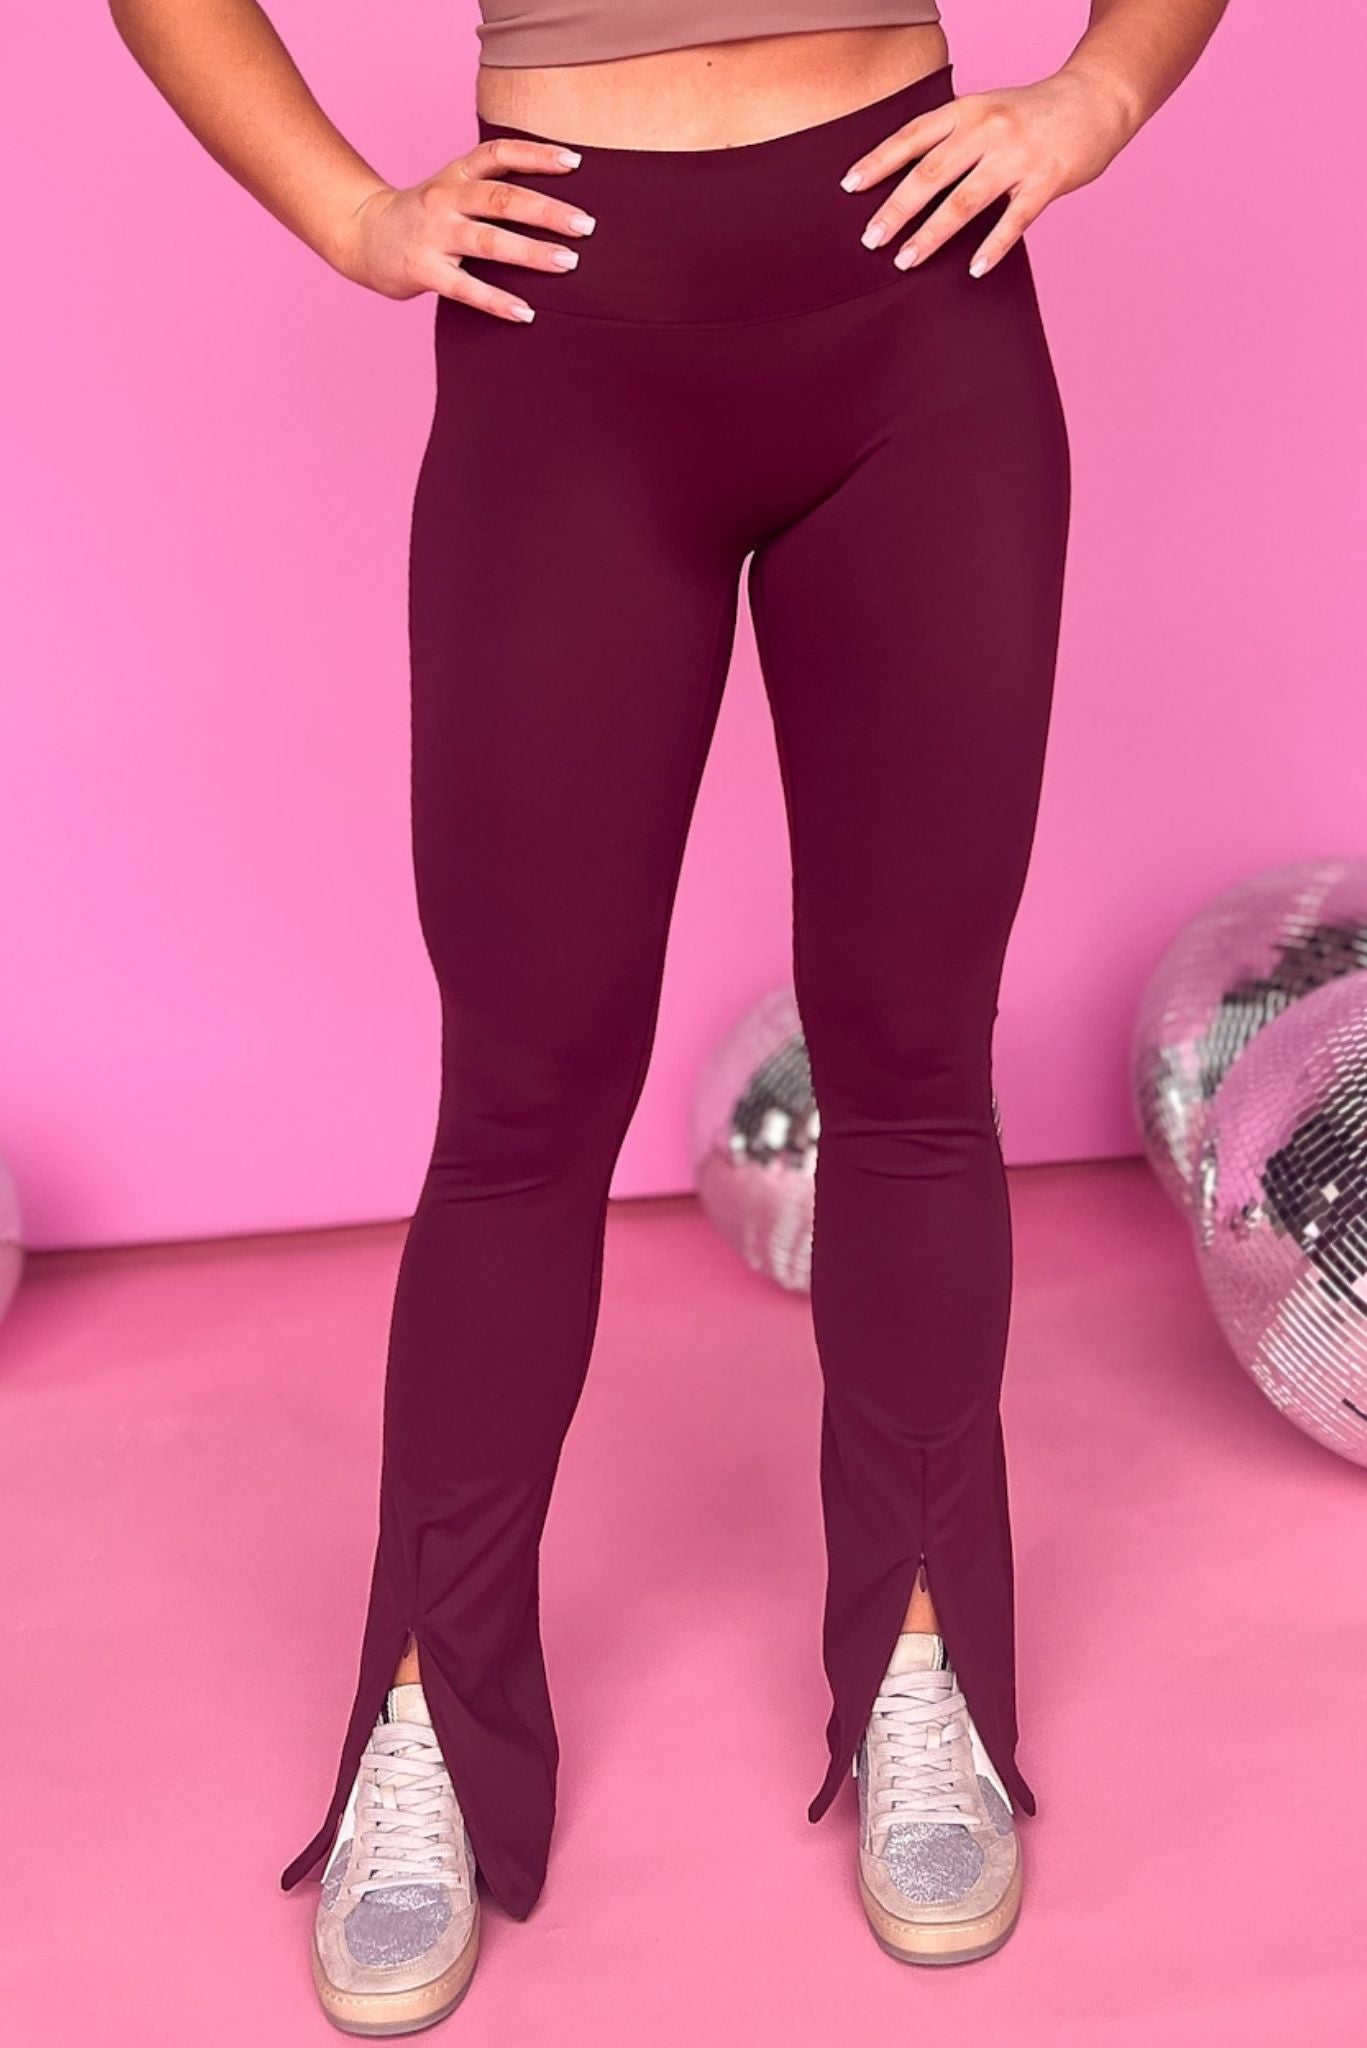 SSYS Burgundy Flare High Waist Leggings With Front Zipper *FINAL SALE*